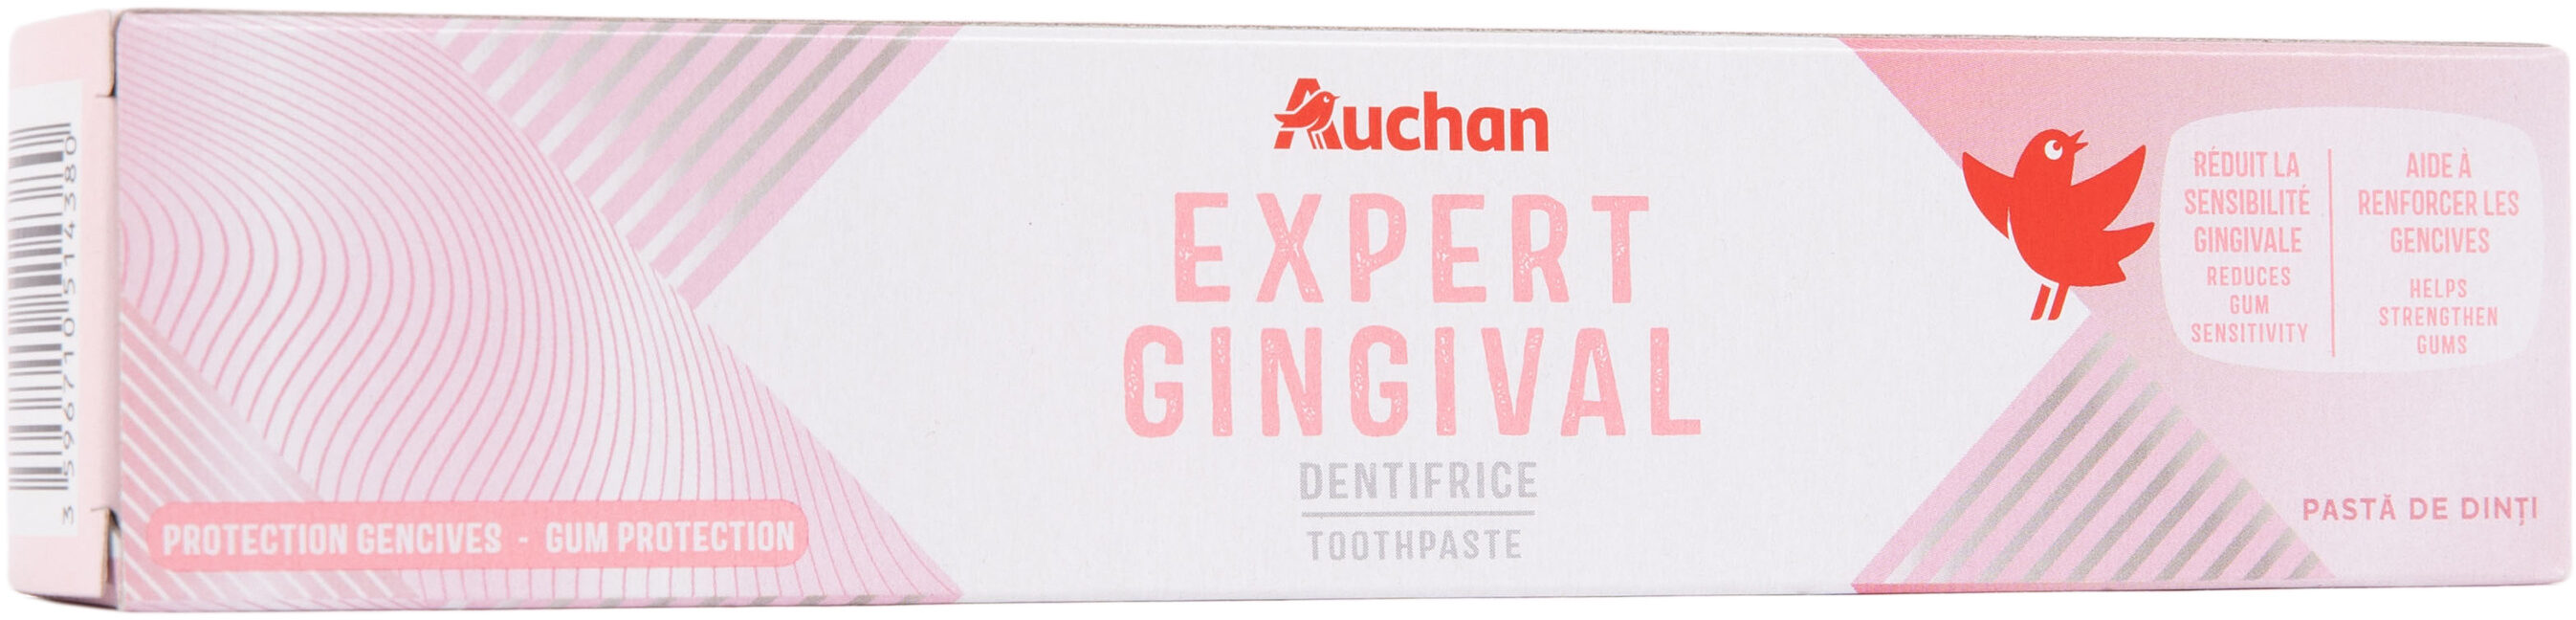 Dentifrice gingival - Product - fr